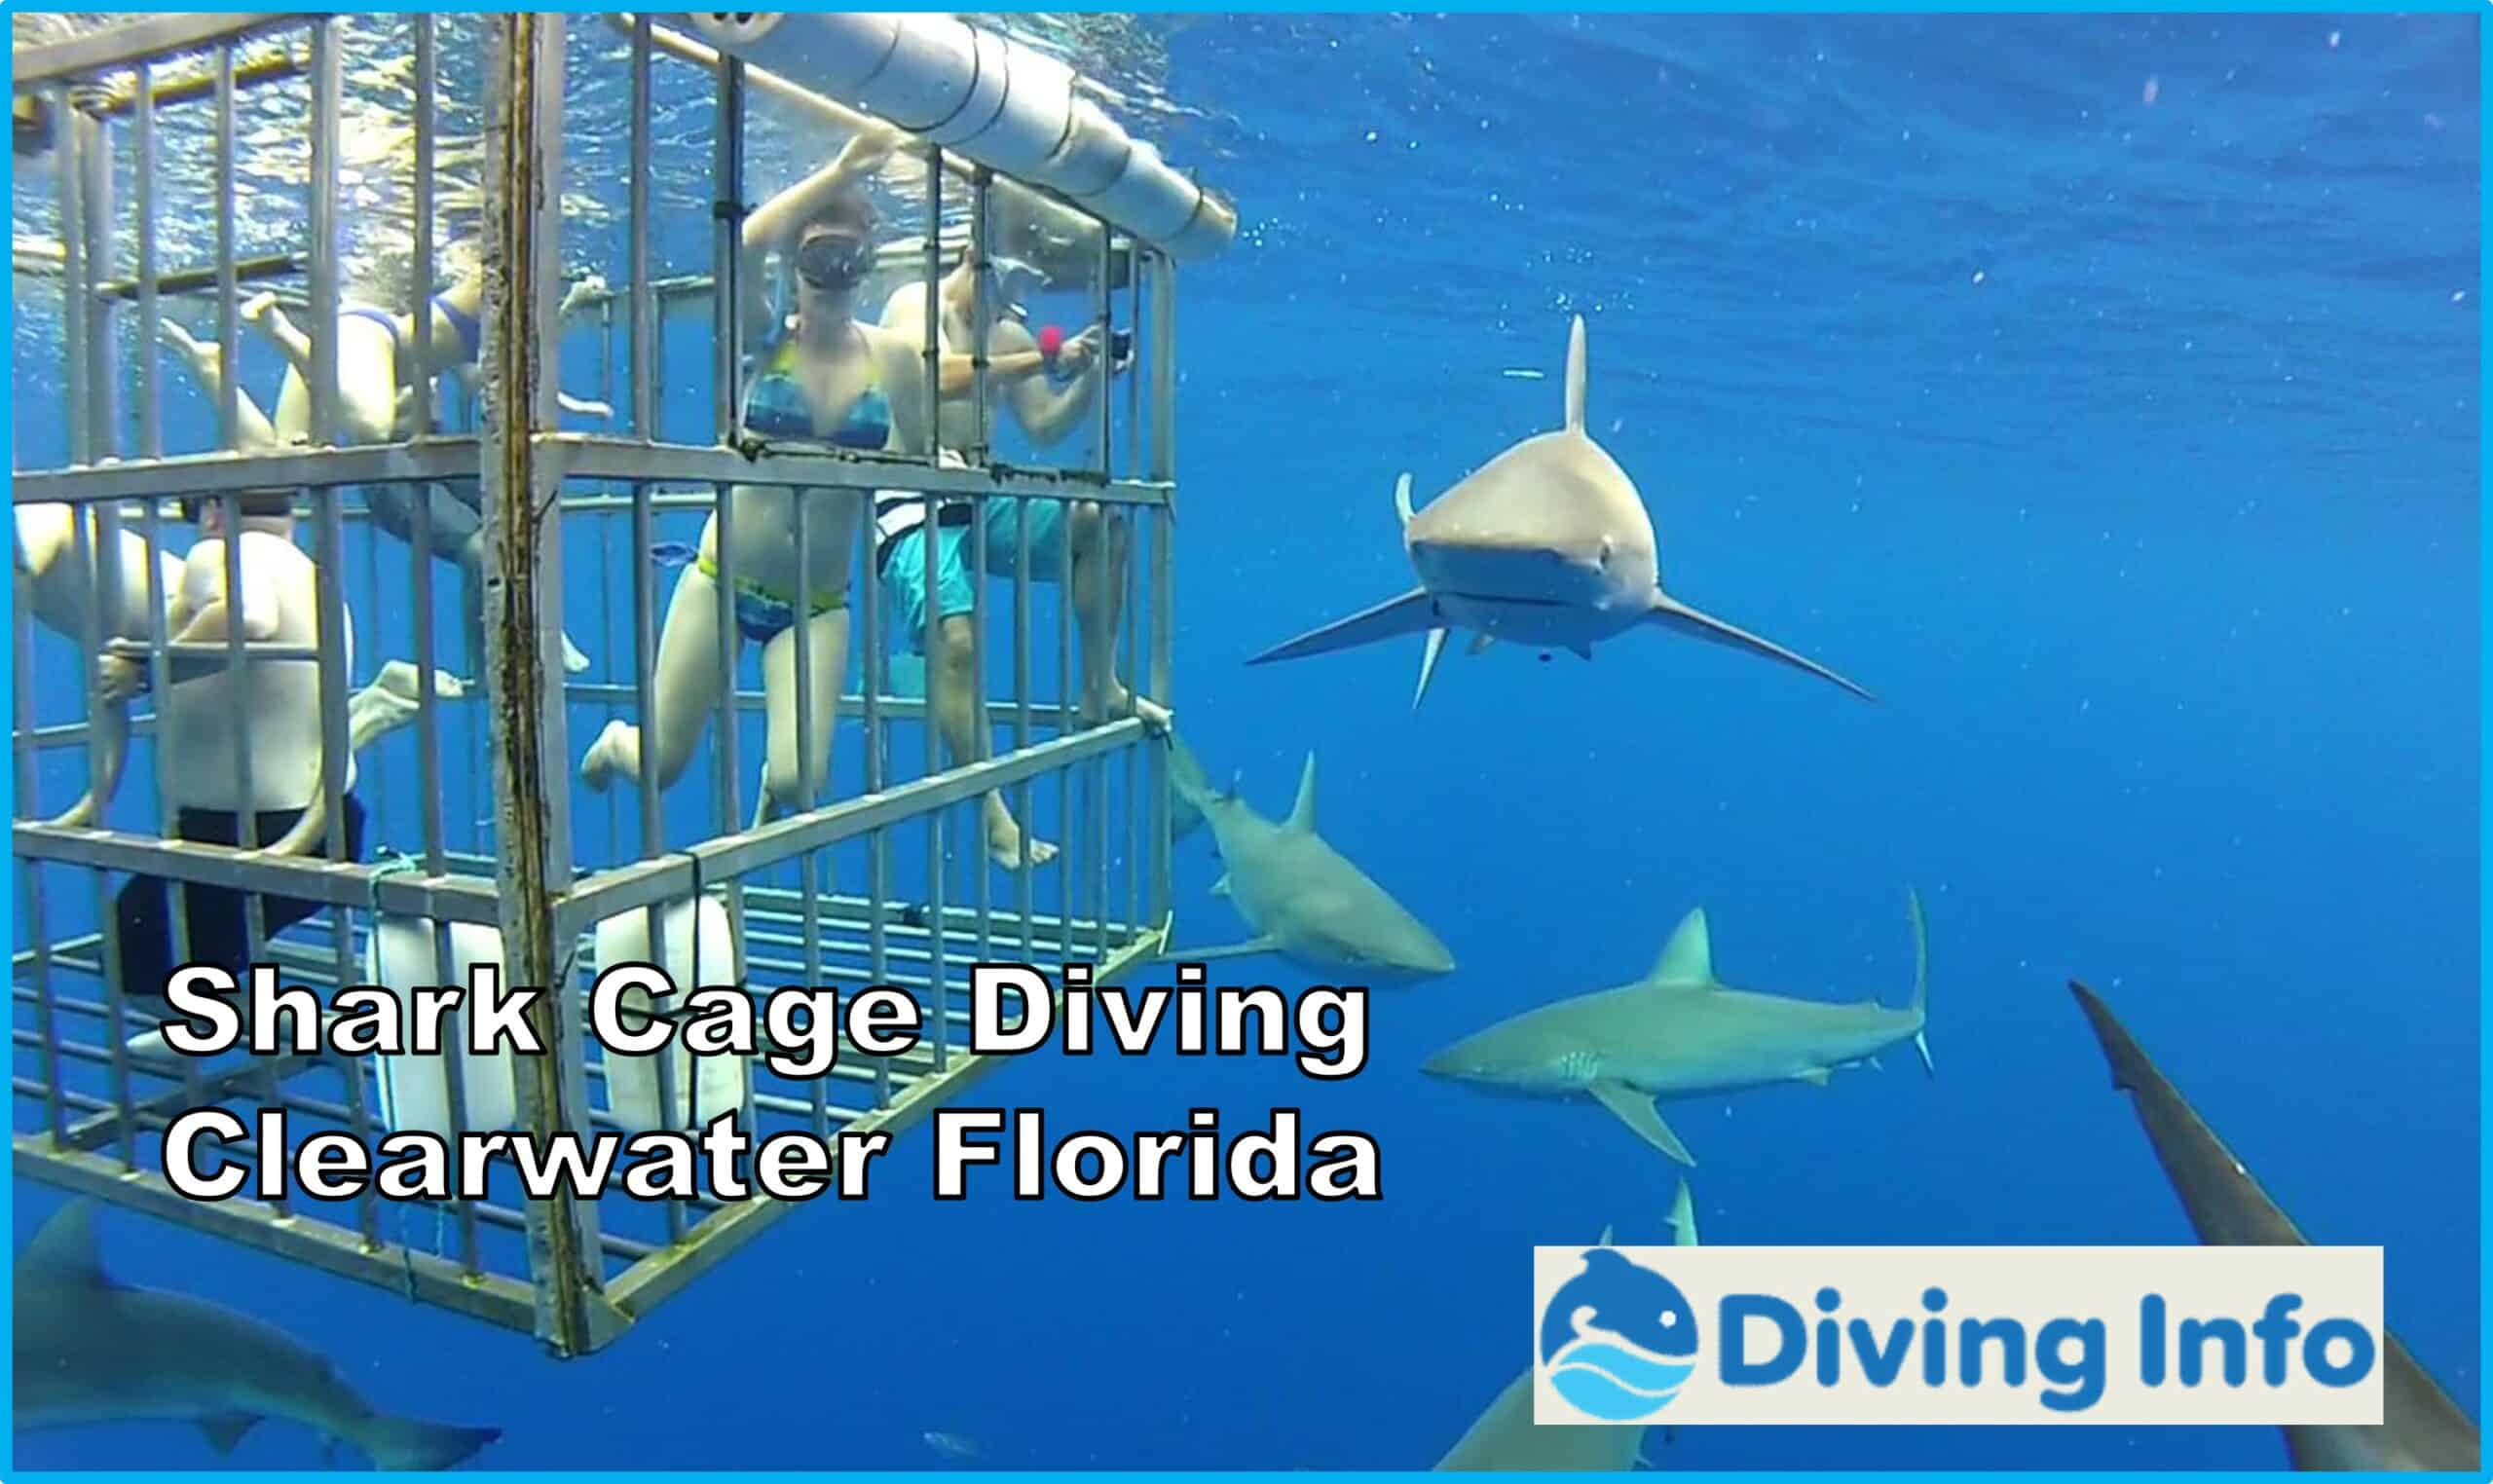 Shark Cage Diving Clearwater Florida